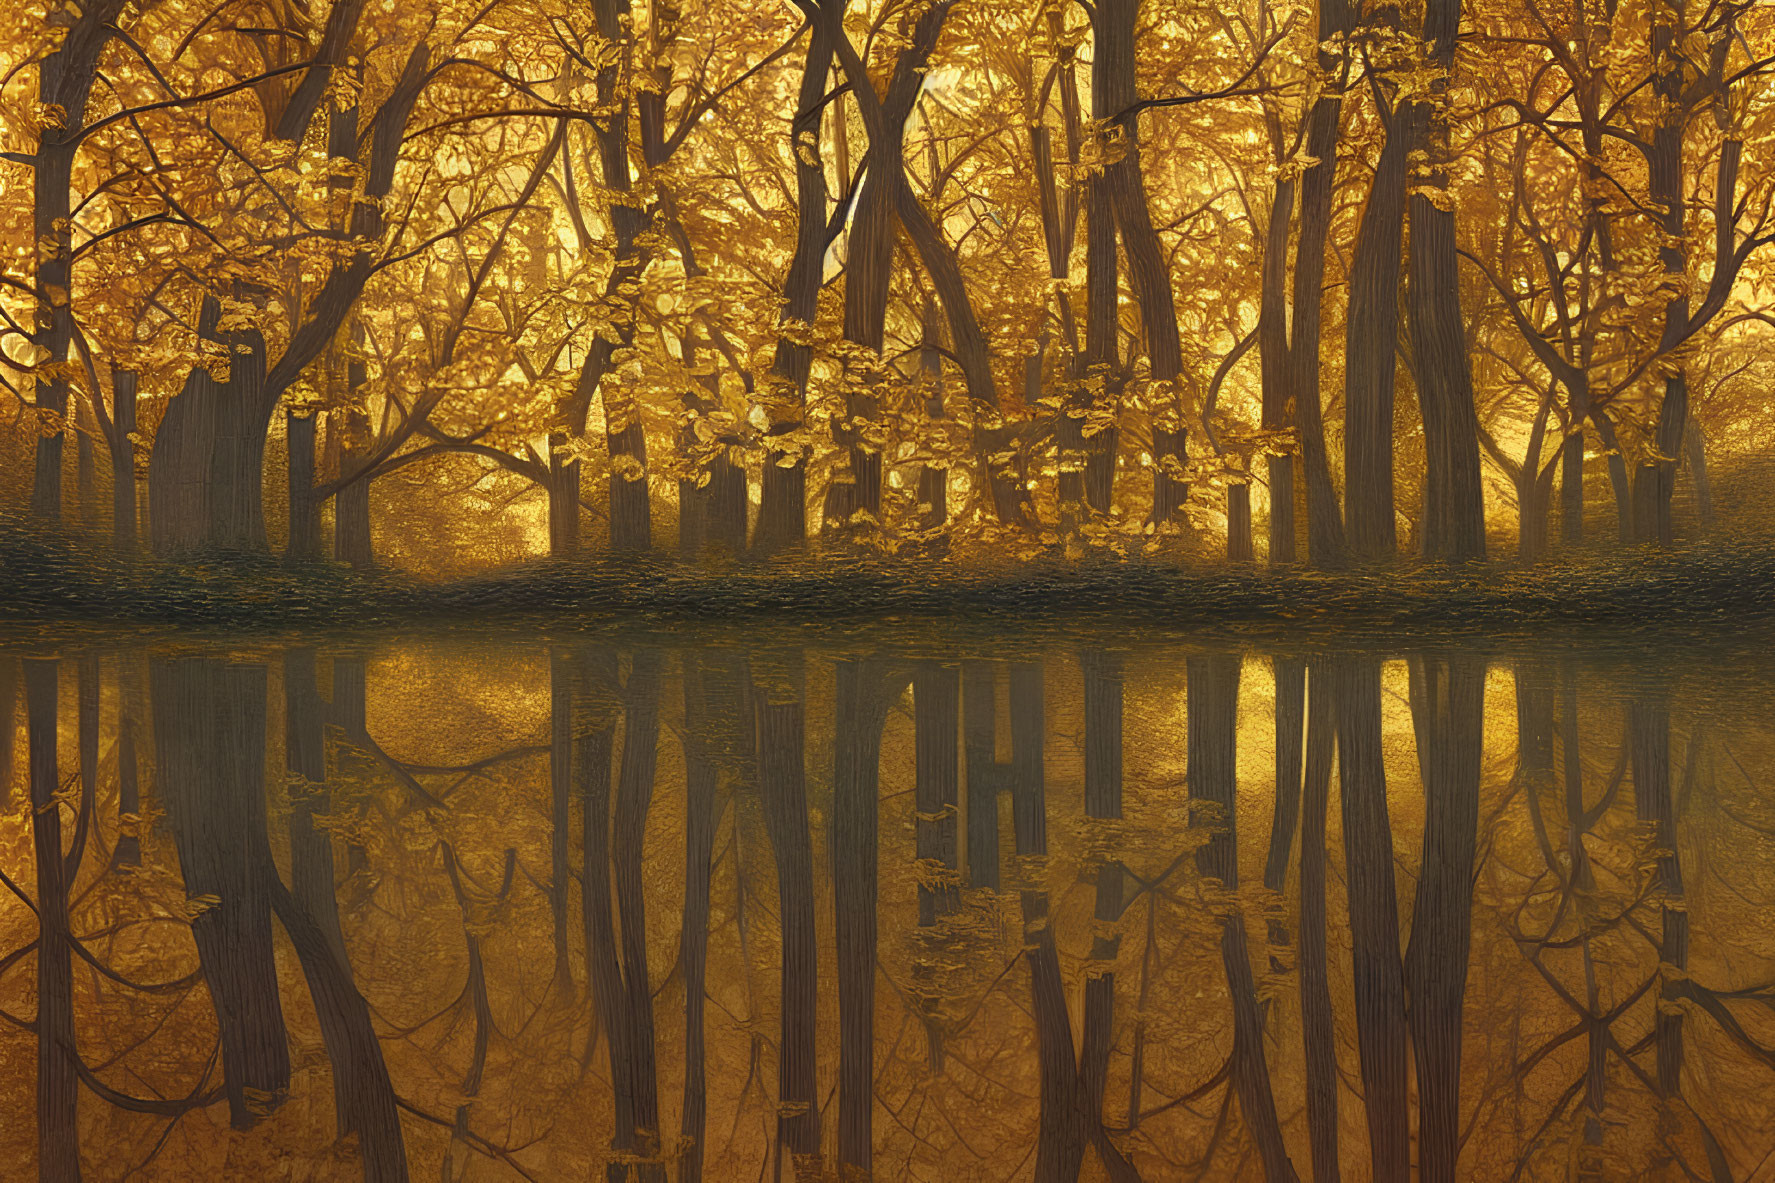 Tranquil autumn forest with golden leaves reflected in calm water